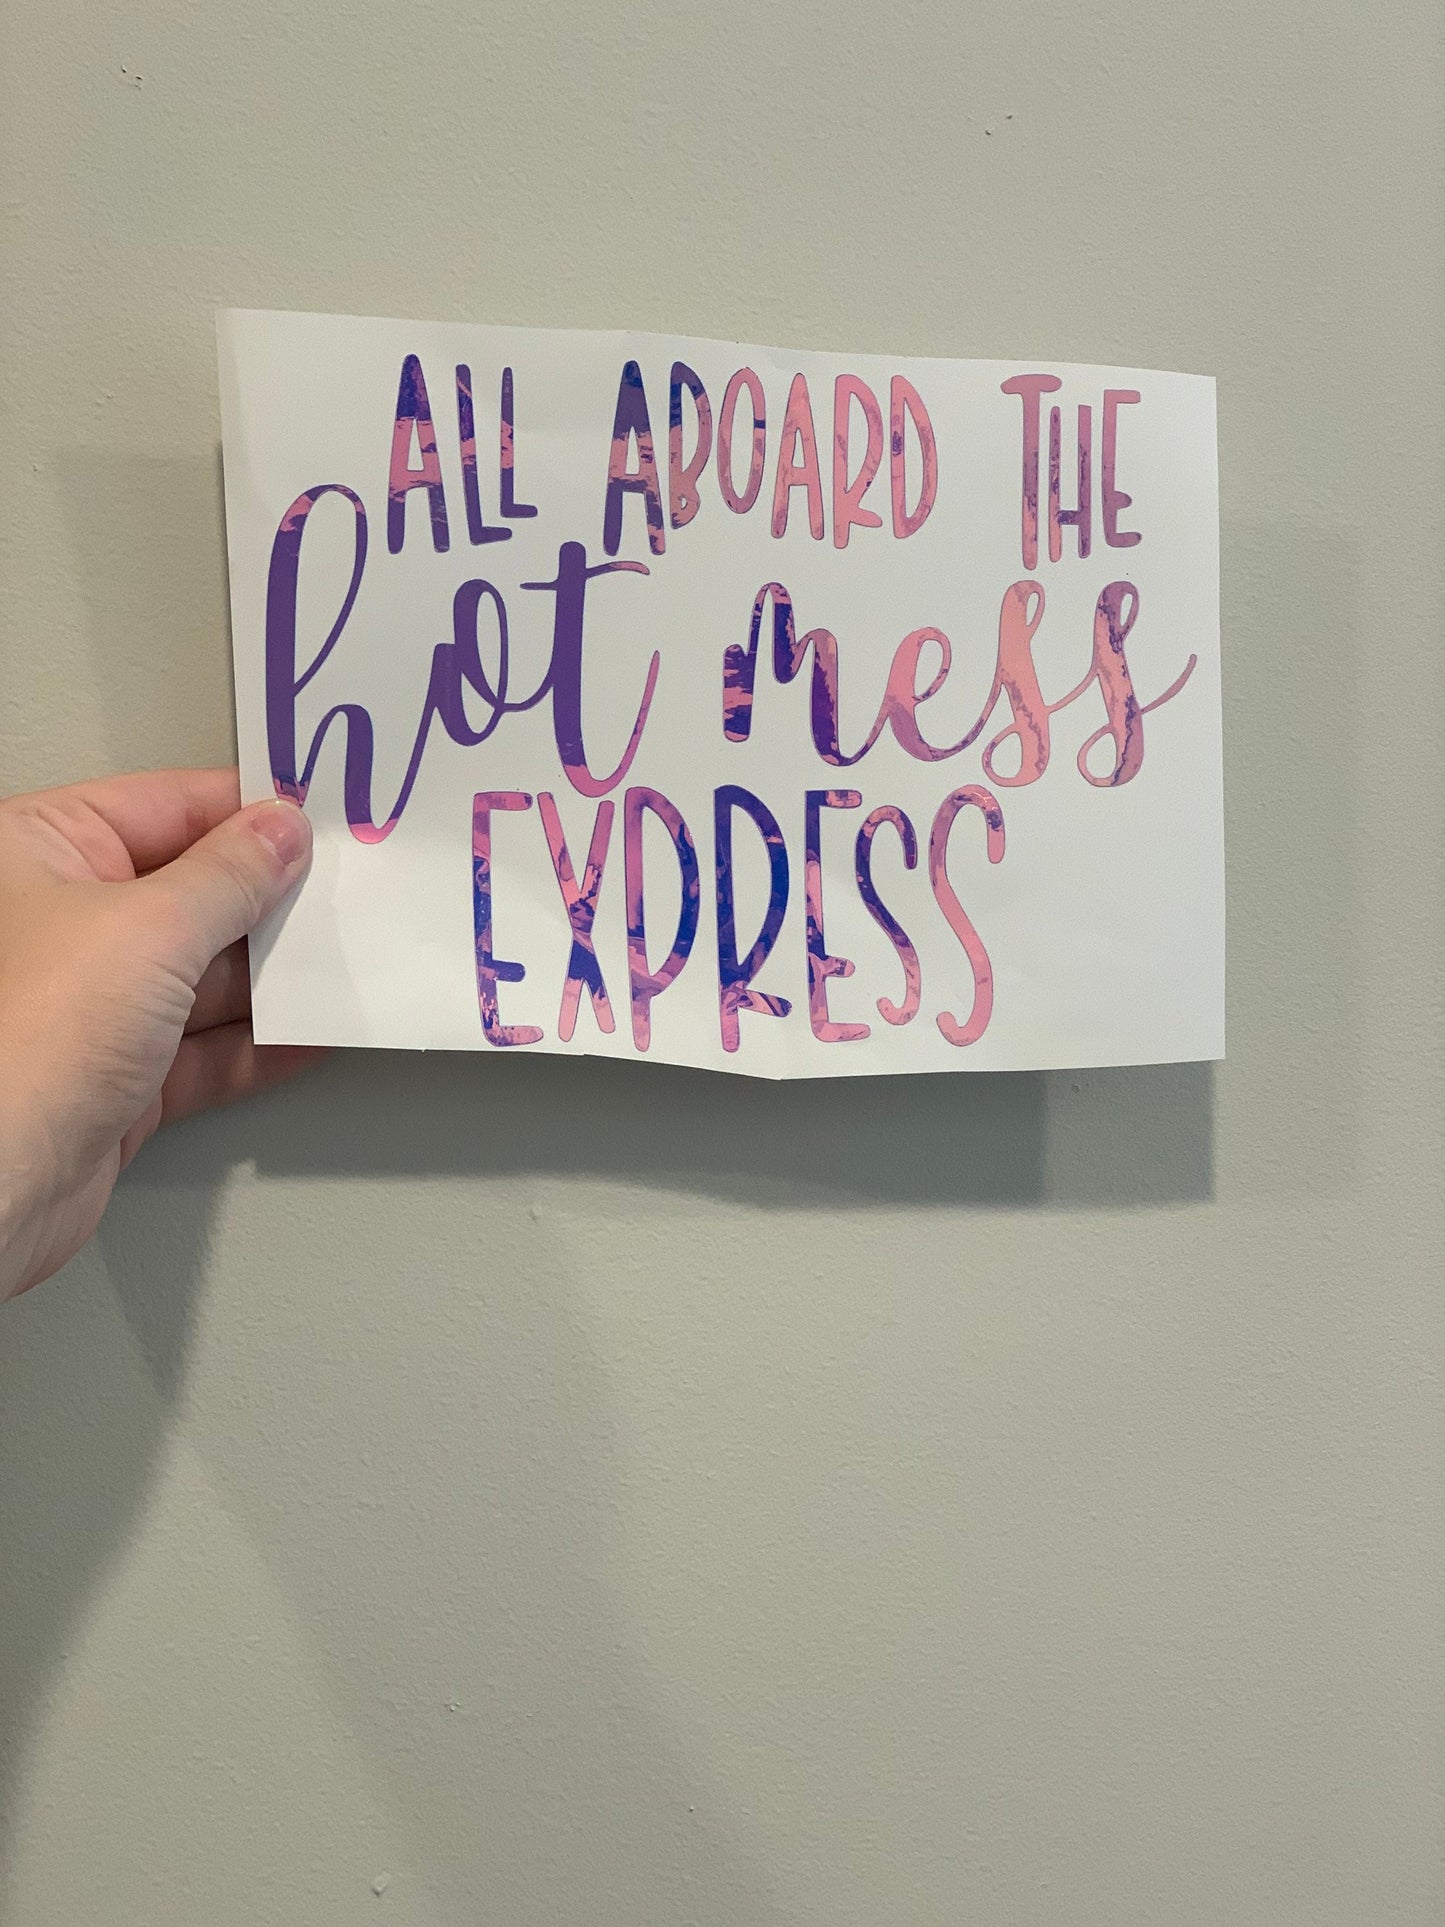 All Aboard The Hot Mess Express Decal